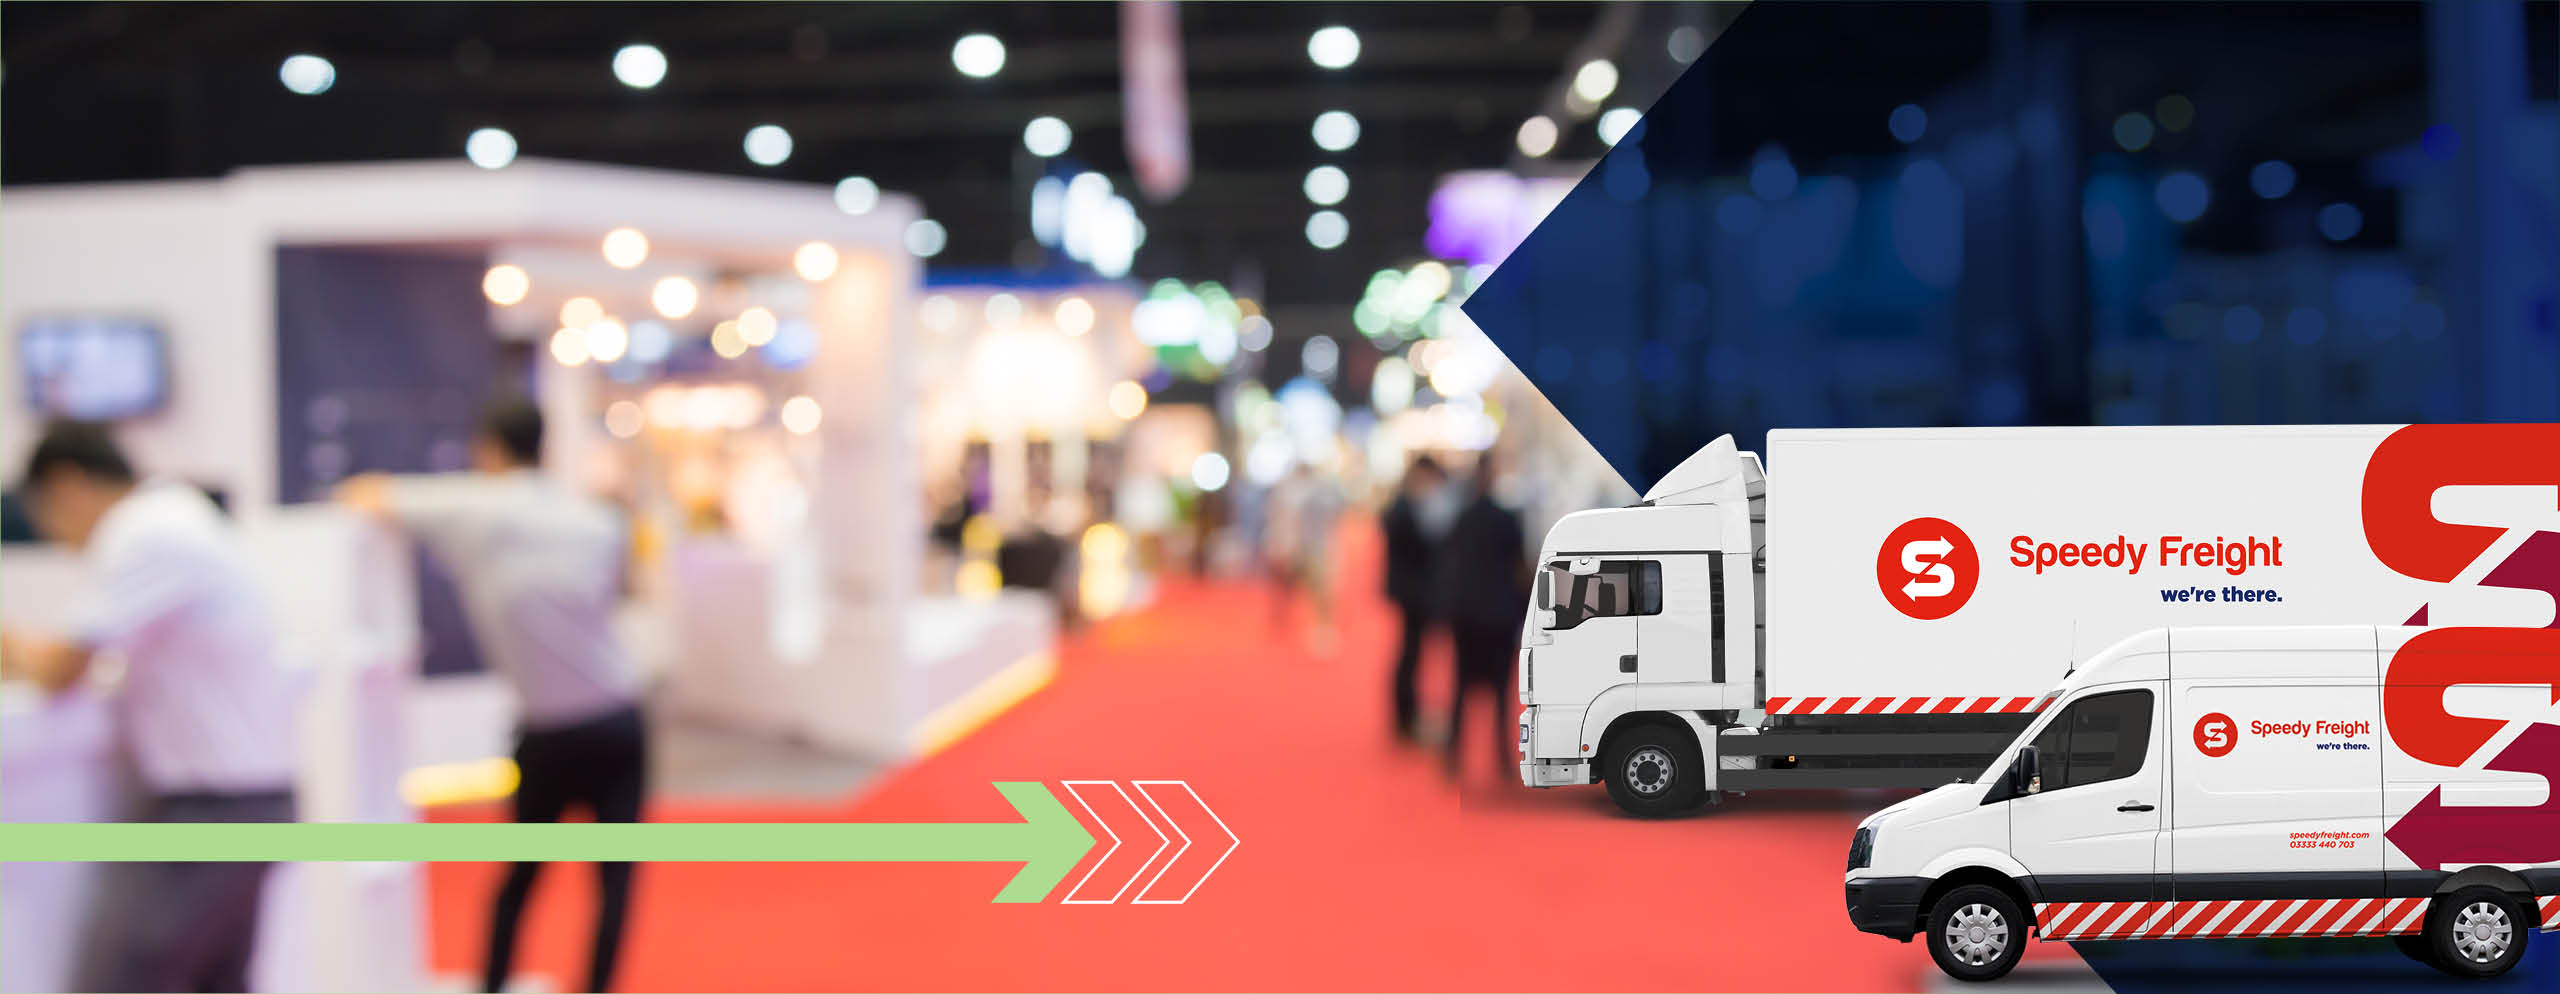 Speedy Freight at the 2023 Retail Supply Chain & Logistics Expo 